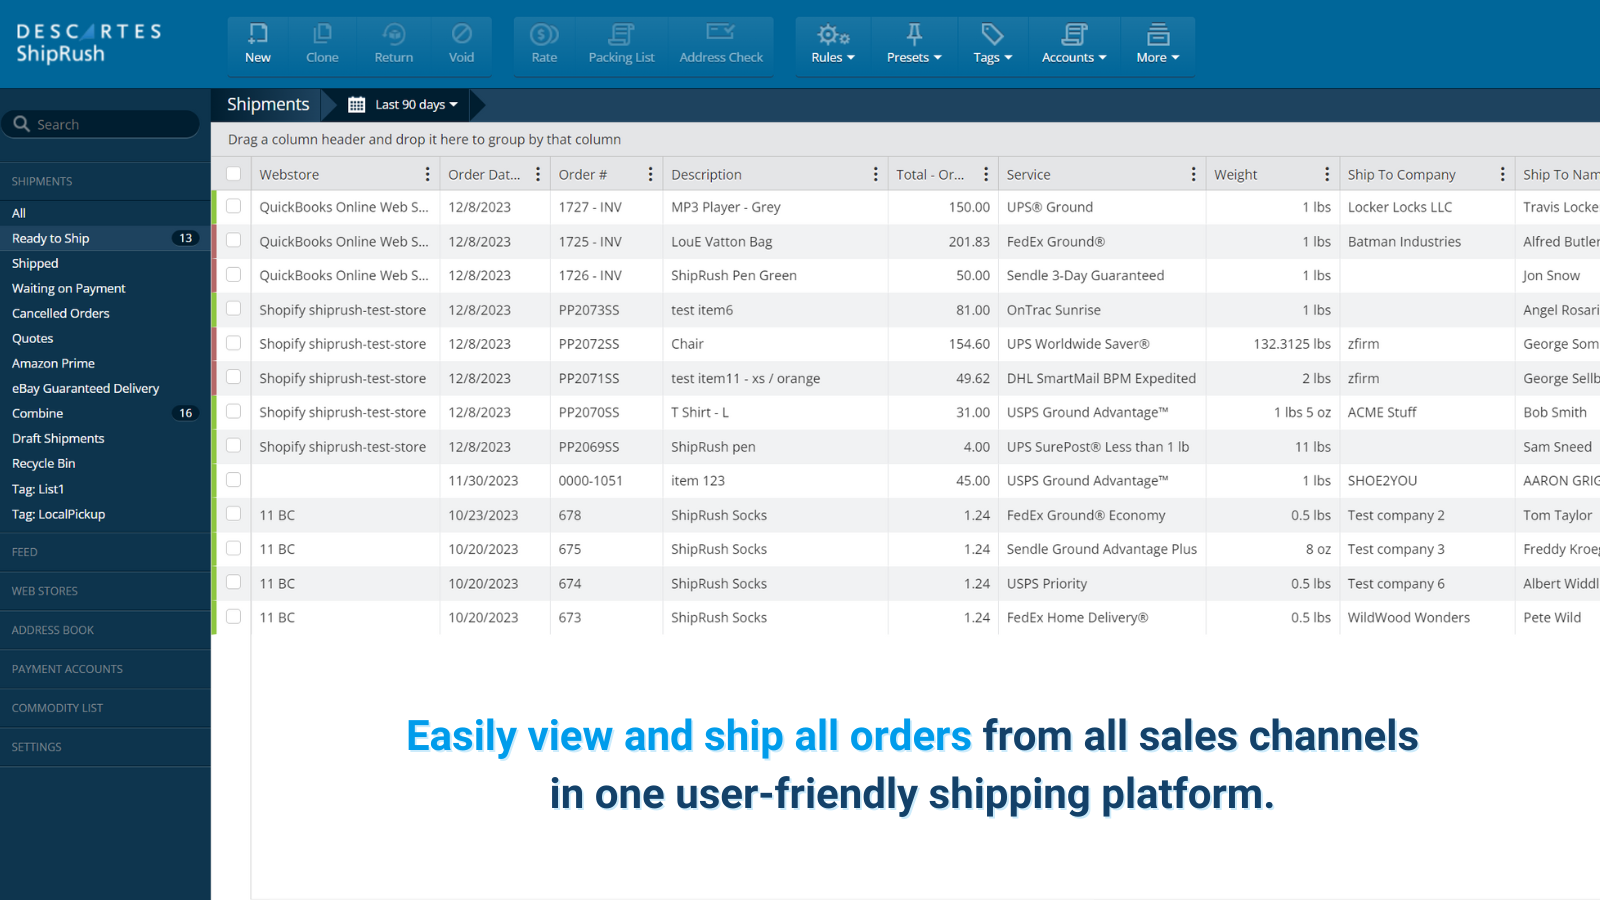 Easily connect your sales channels and manage all orders in one place. Upload orders from Excel or select from 90+ sources like Shopify, WooCommerce, eBay, Big Commerce, Amazon, Magento, Etsy, QuickBooks, and more.